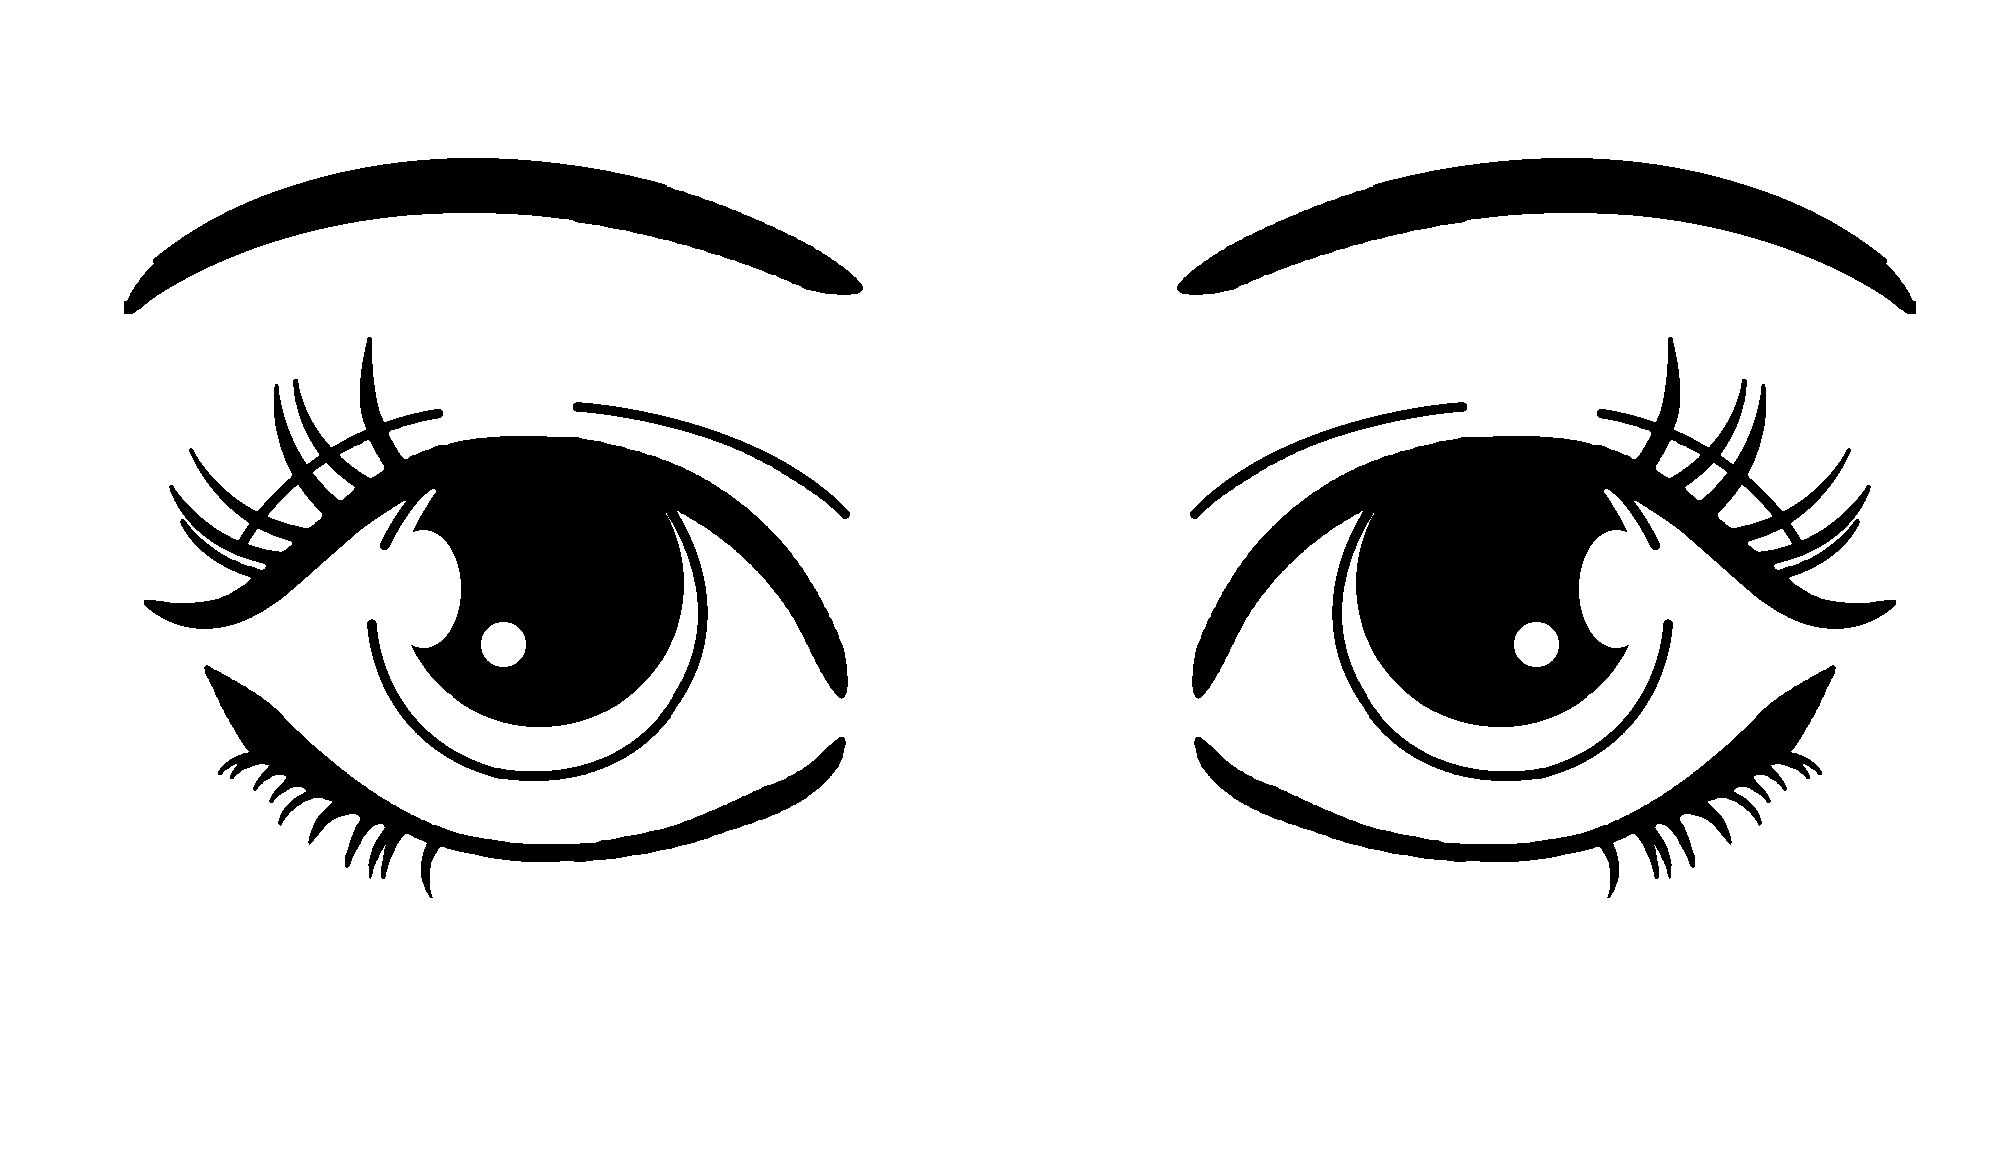 Eyes looking images pictures. Eyeballs clipart